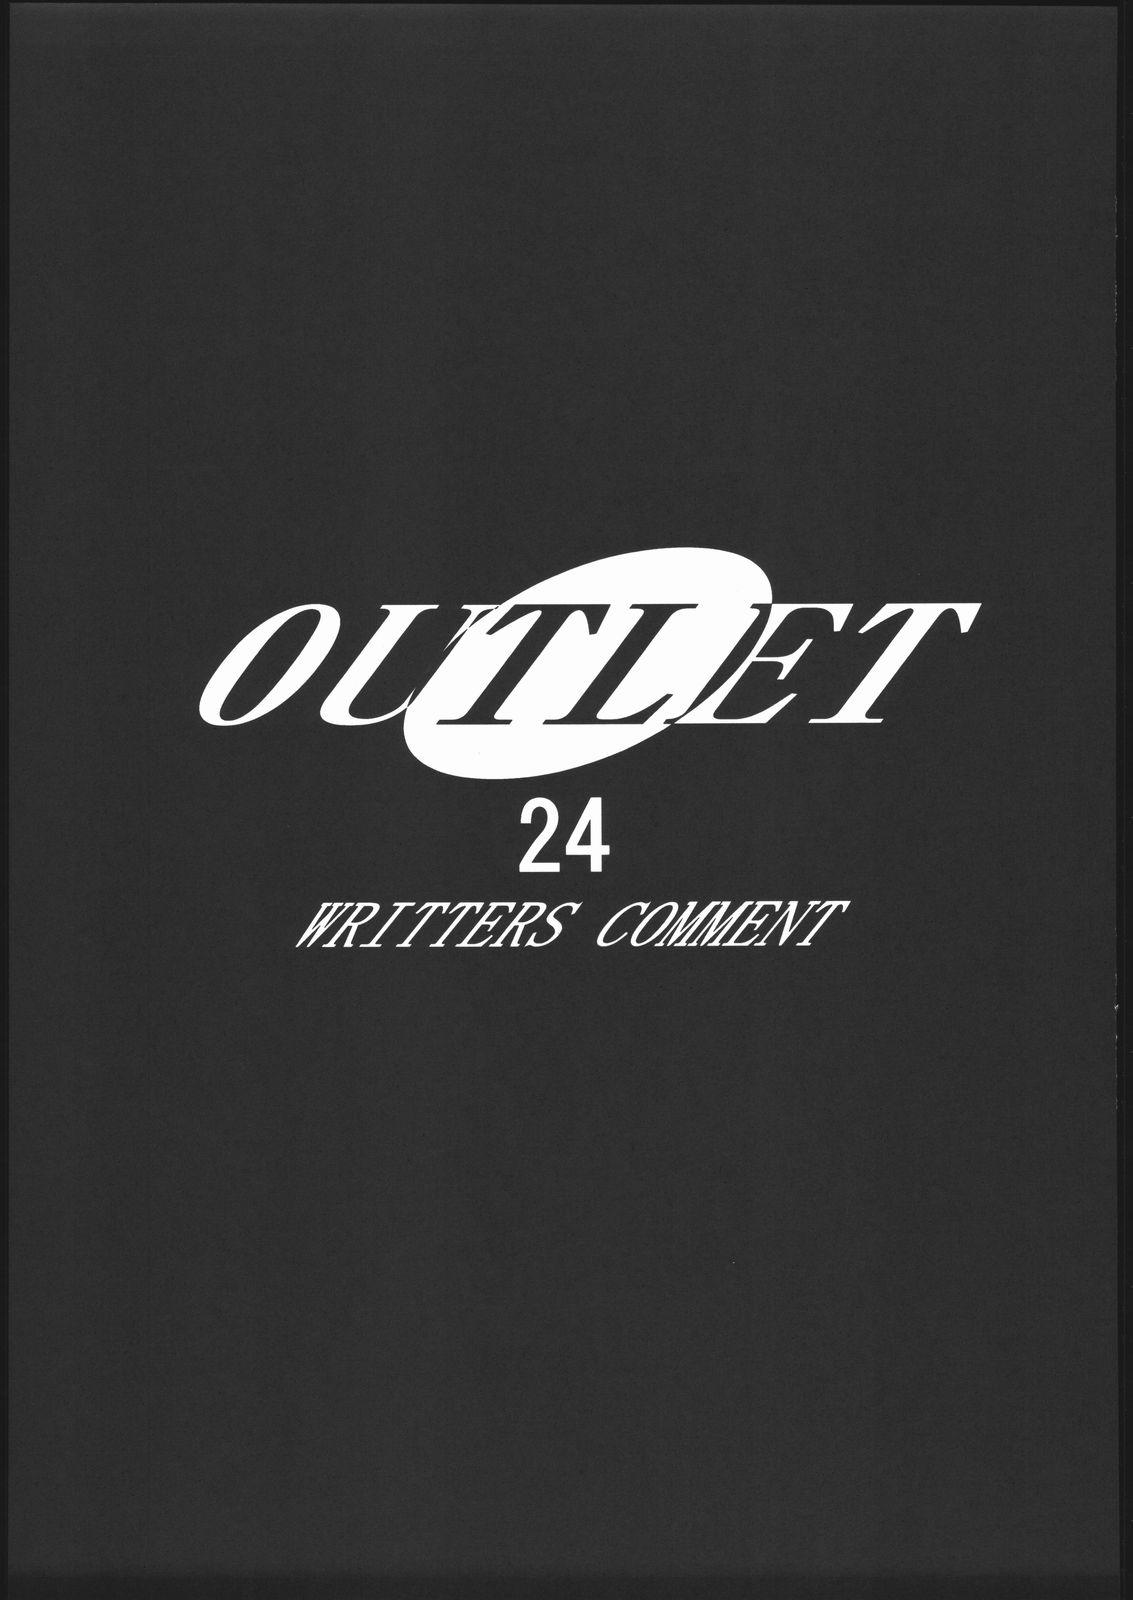 OUTLET 24 43